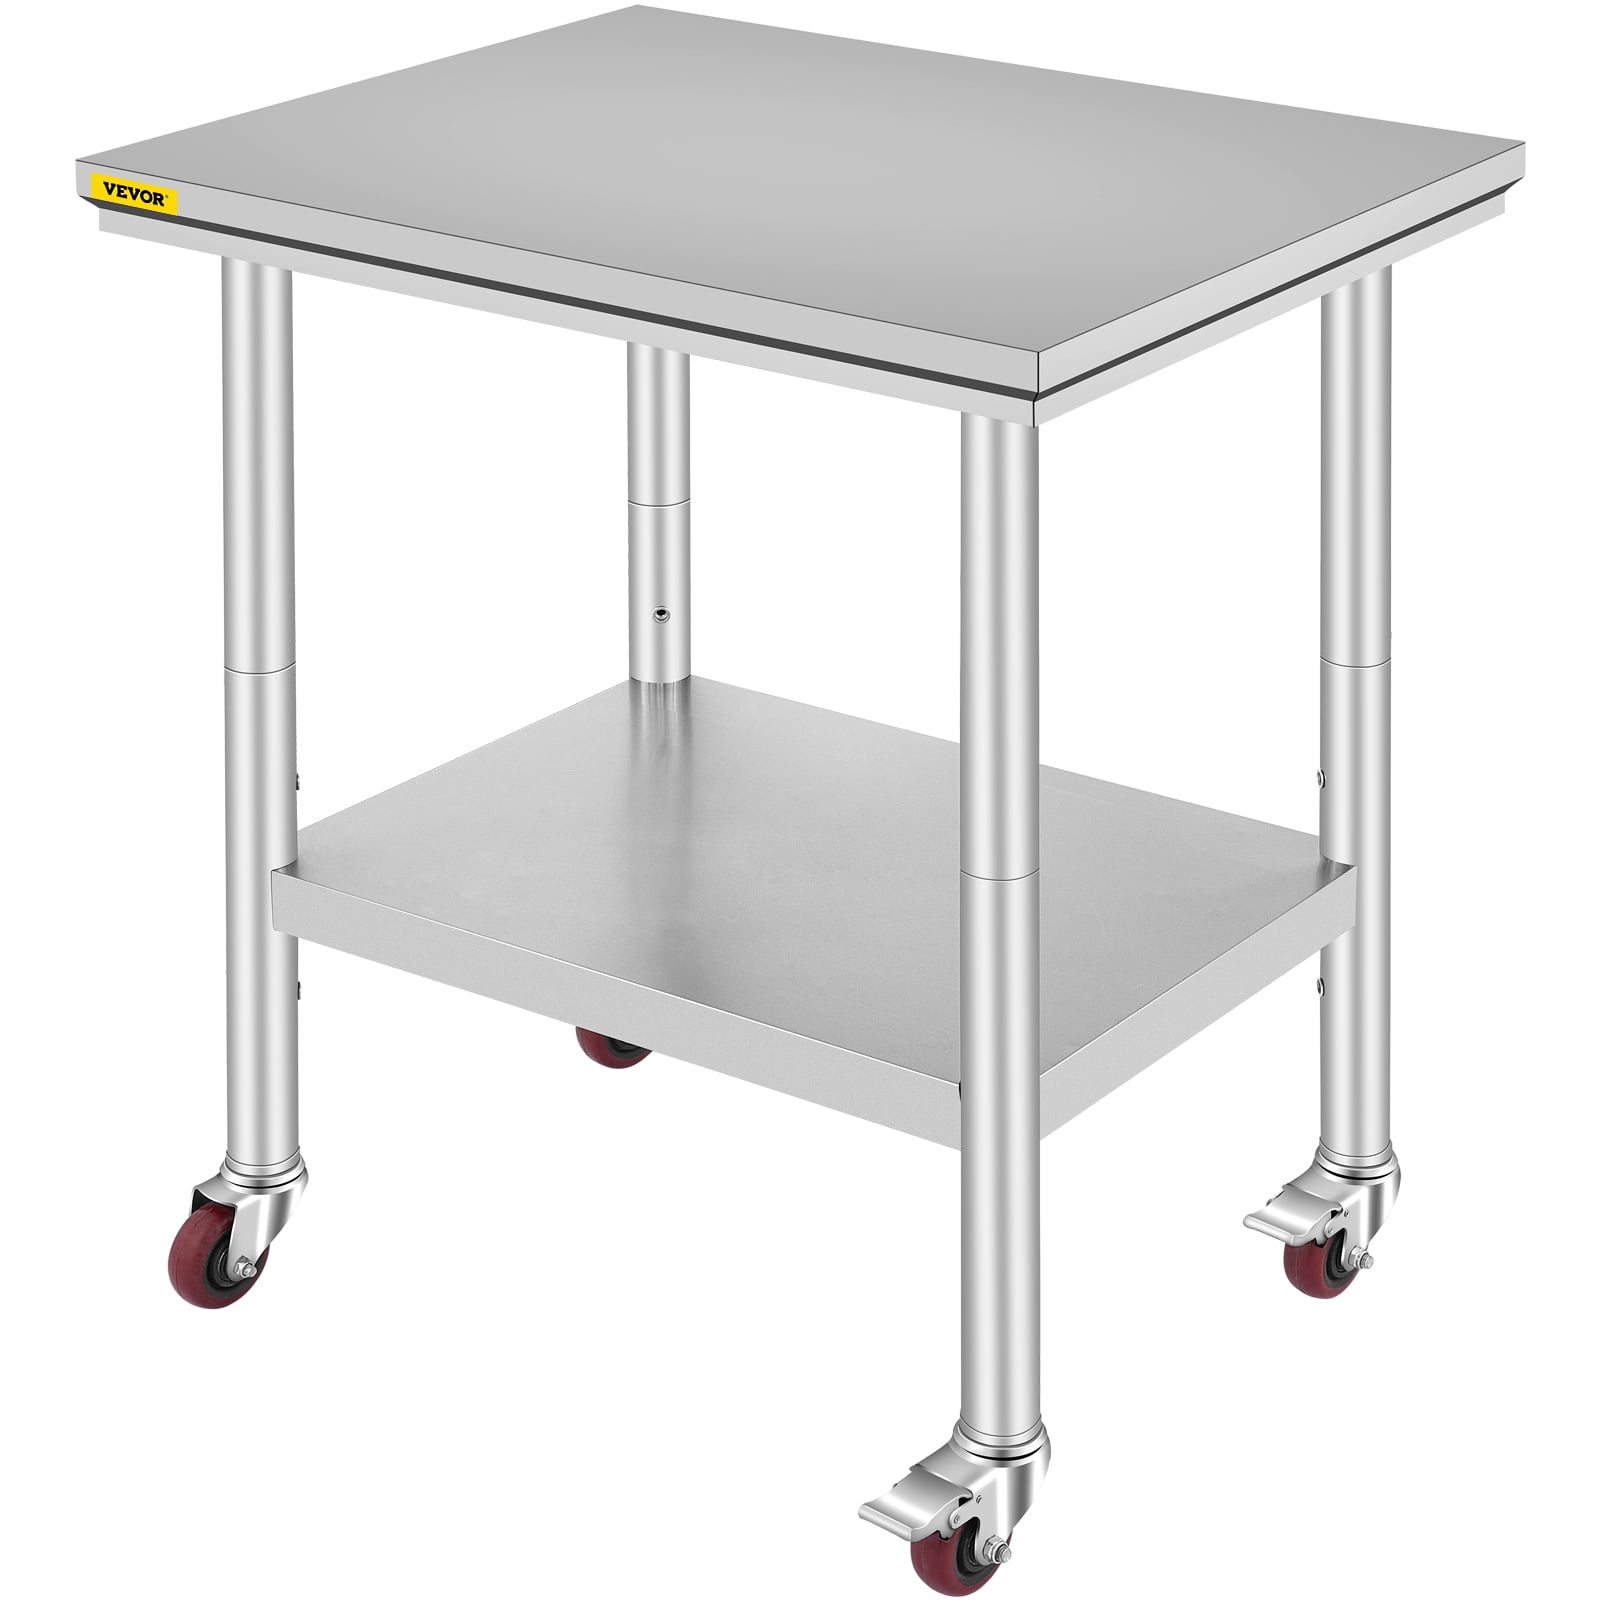 24" x 36" Stainless Steel Commercial Kitchen NSF Prep & Work Table w/ 4 Wheels 